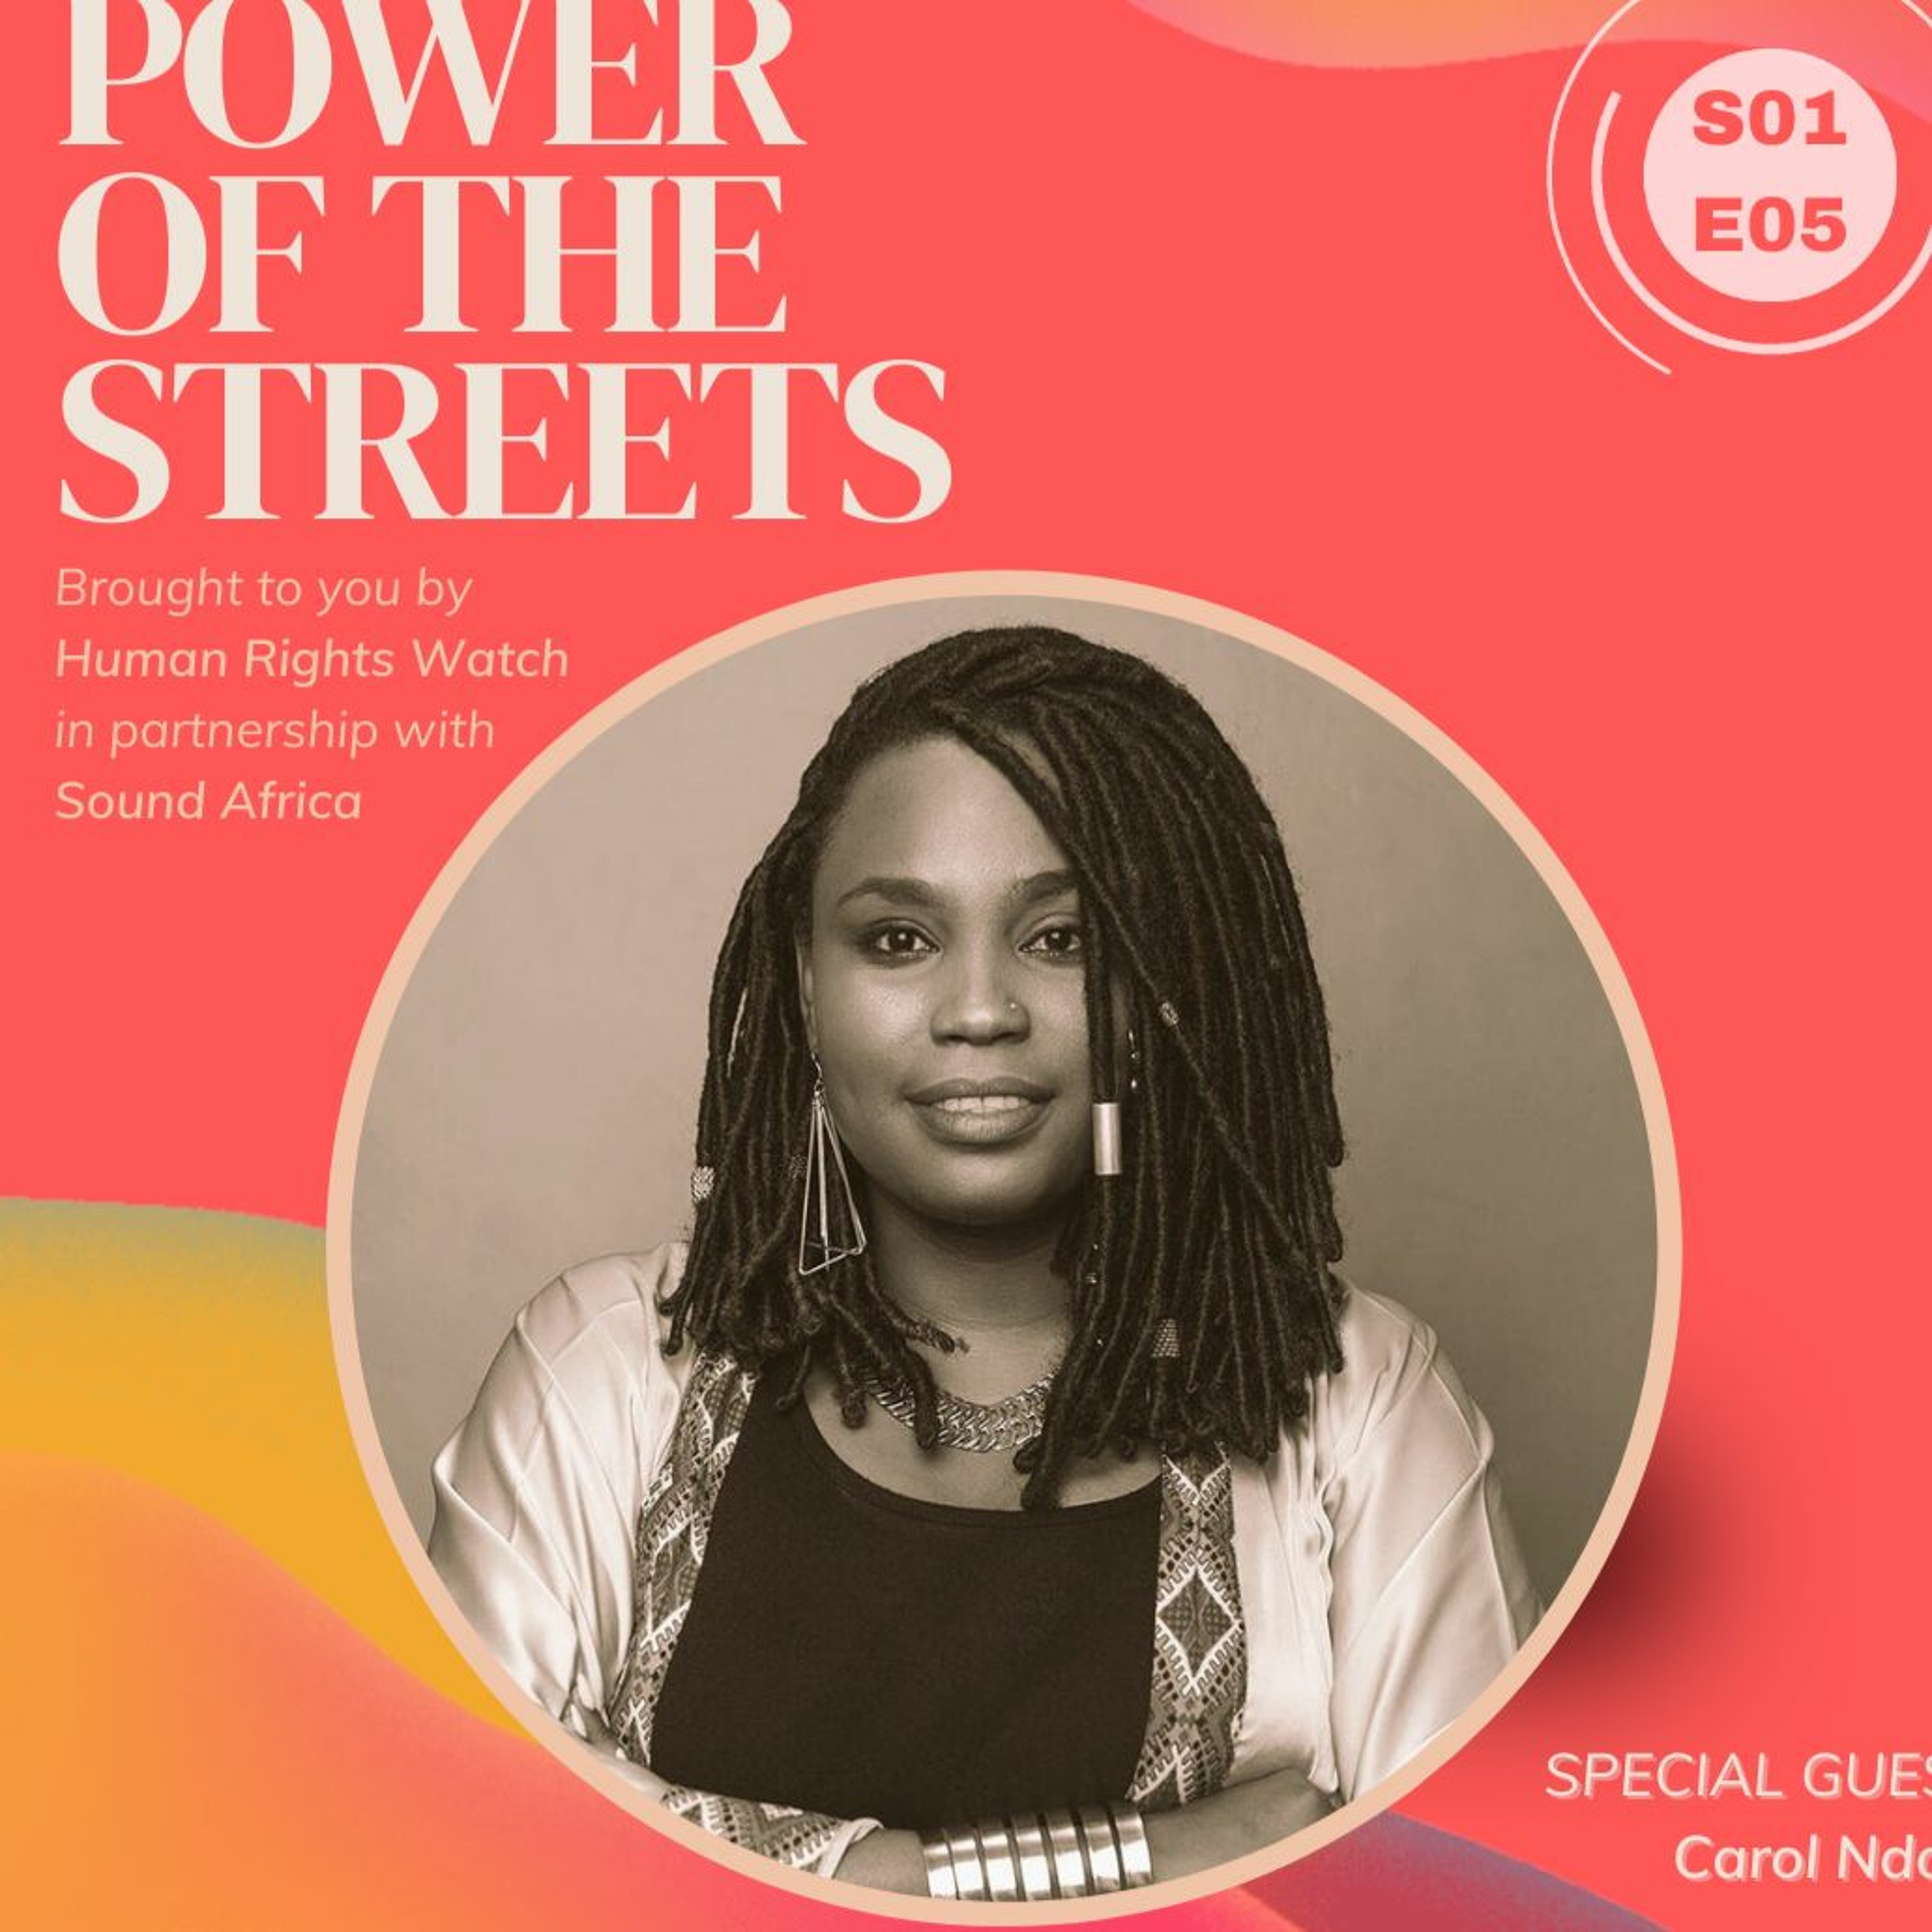 Power Of The Streets Episode 05